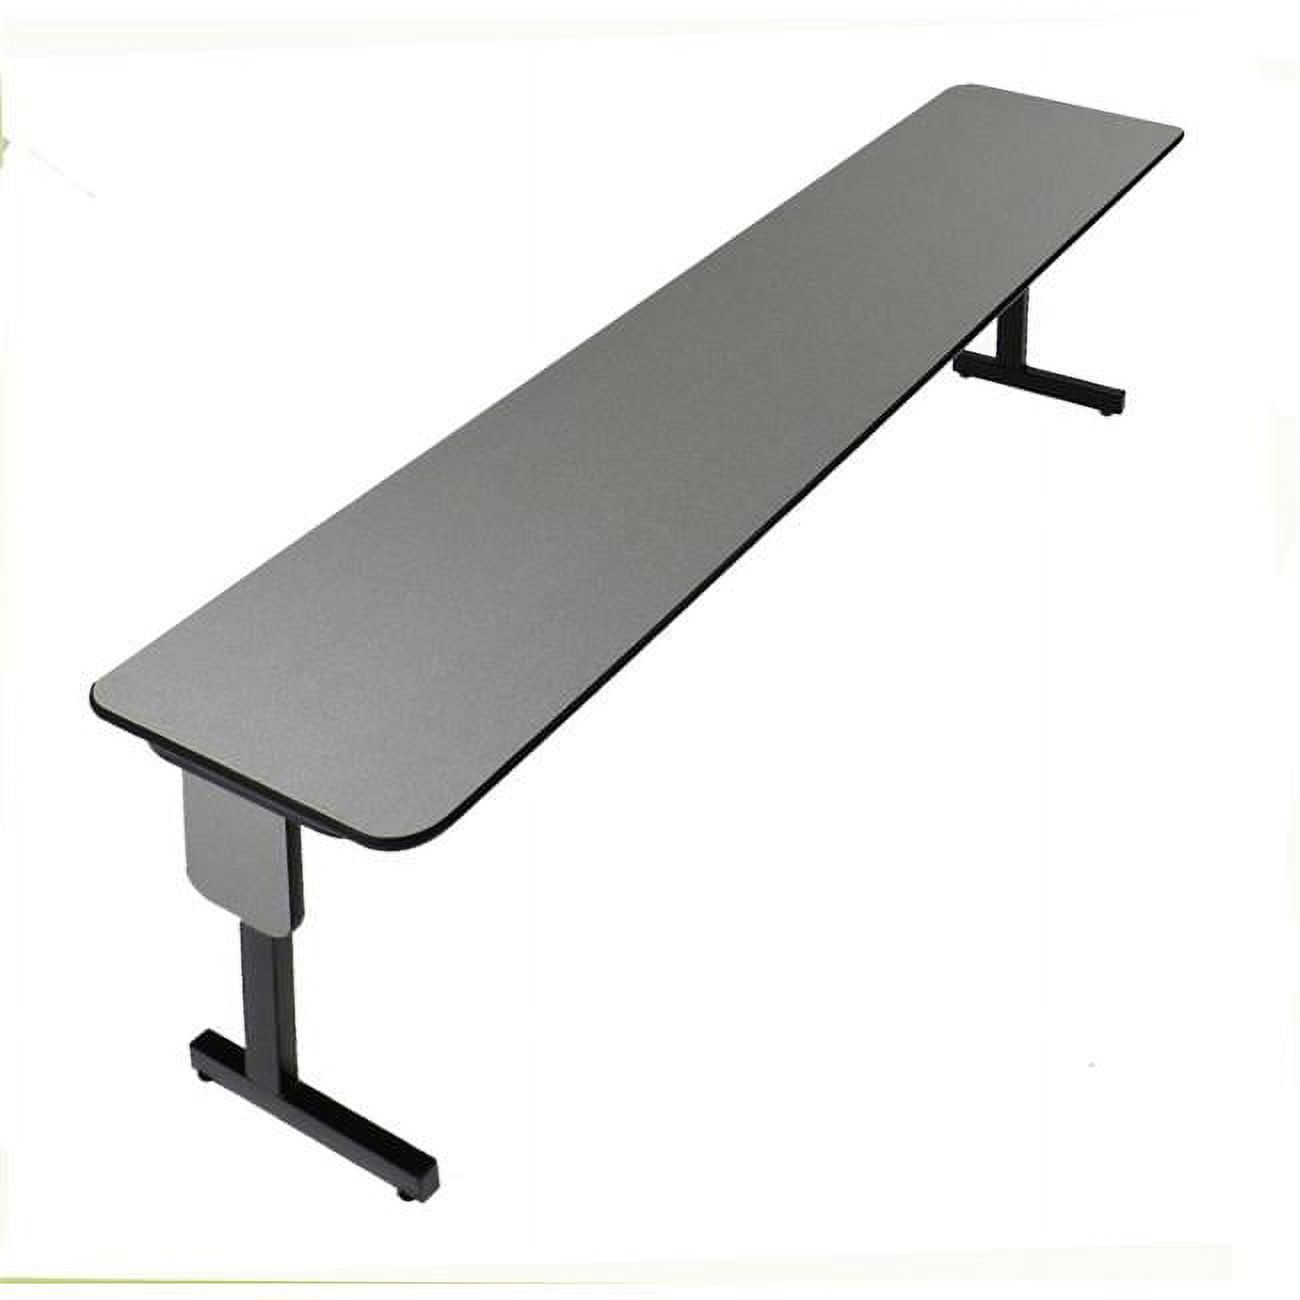 Spa2496px-55 Adjustable Height 0.75 In. High Pressure Rectangular Folding Seminar Table With Panel Leg, Montana Granite - 24 X 96 In.